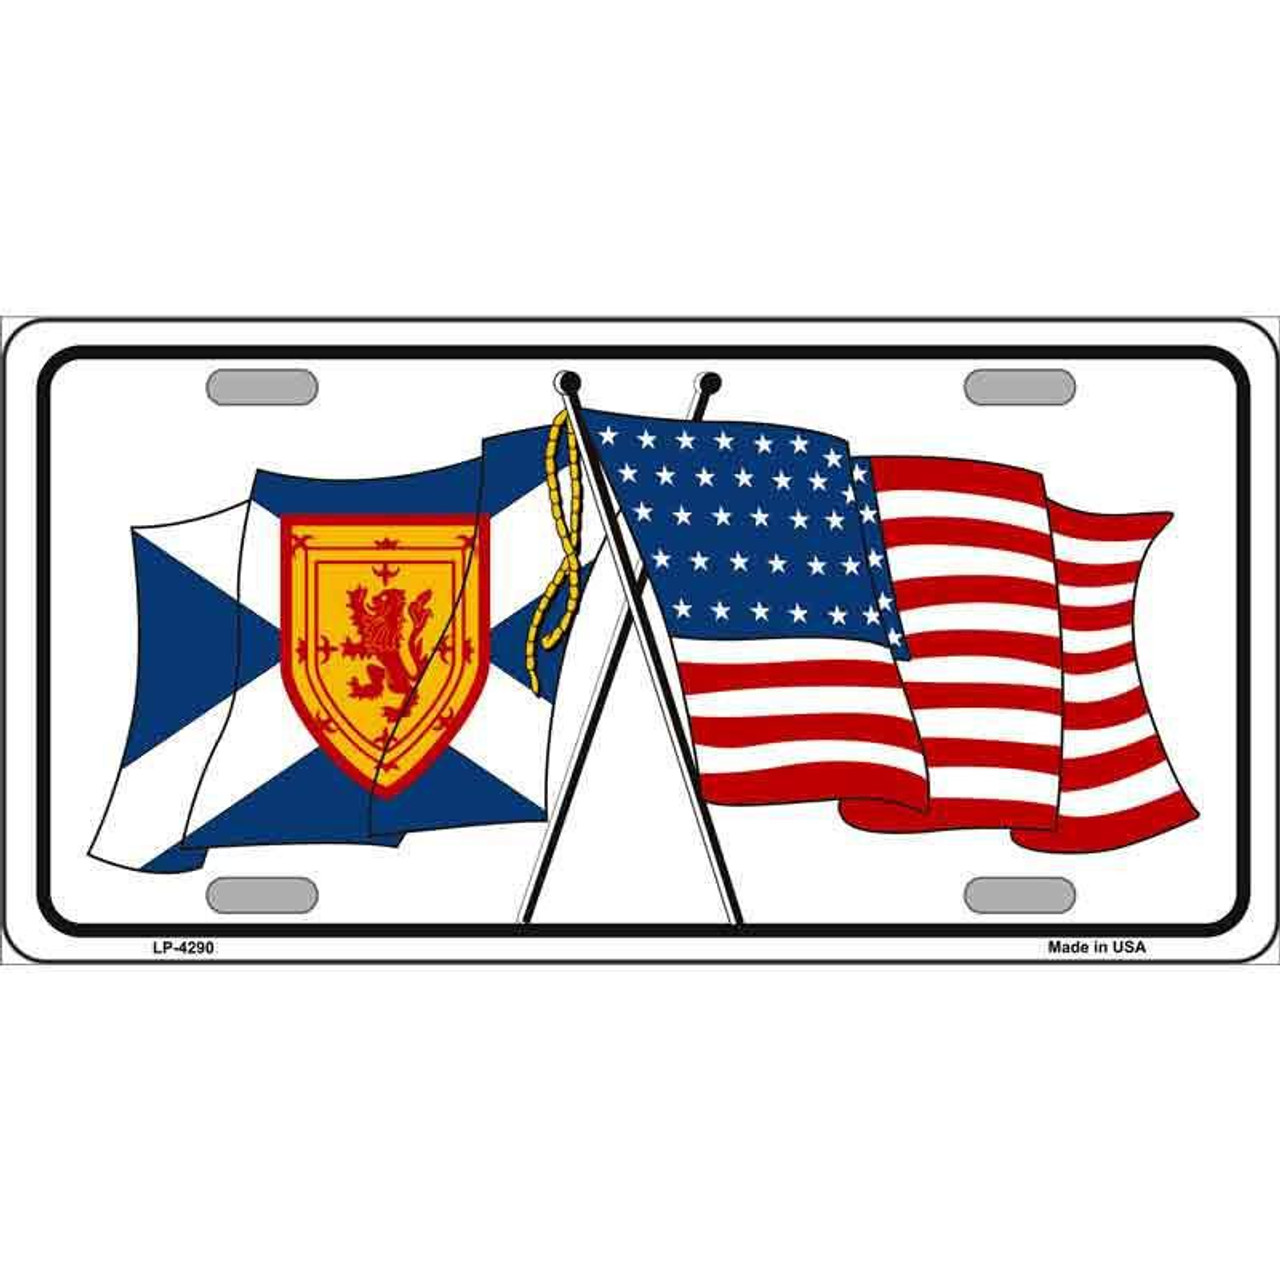 USA/Scotland Crossed Flags Metal Novelty License Plate Sign